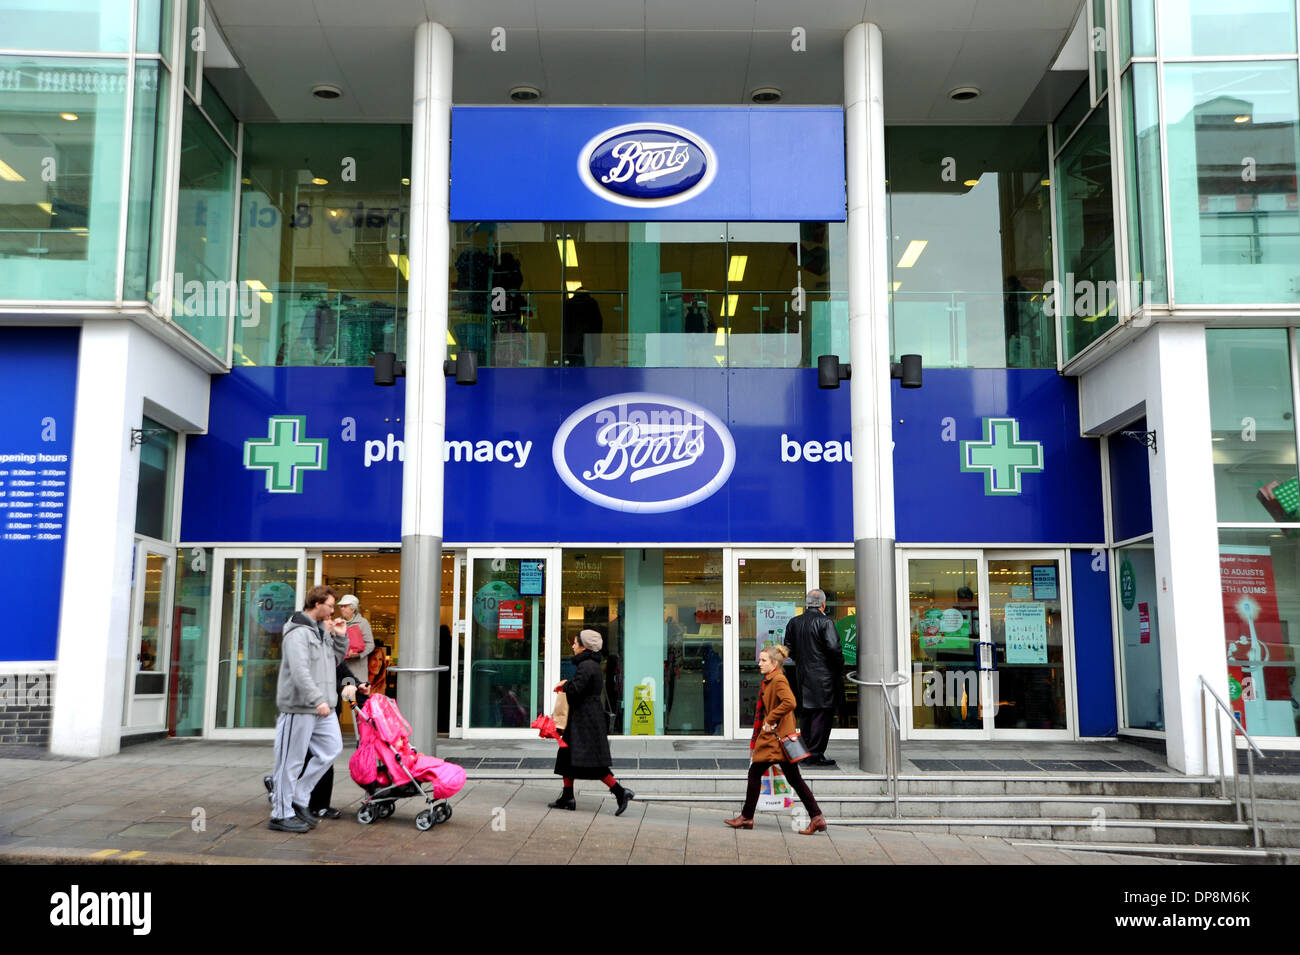 Boots the Chemist Pharmacy shop in North Street Brighton during the winter  UK Stock Photo - Alamy